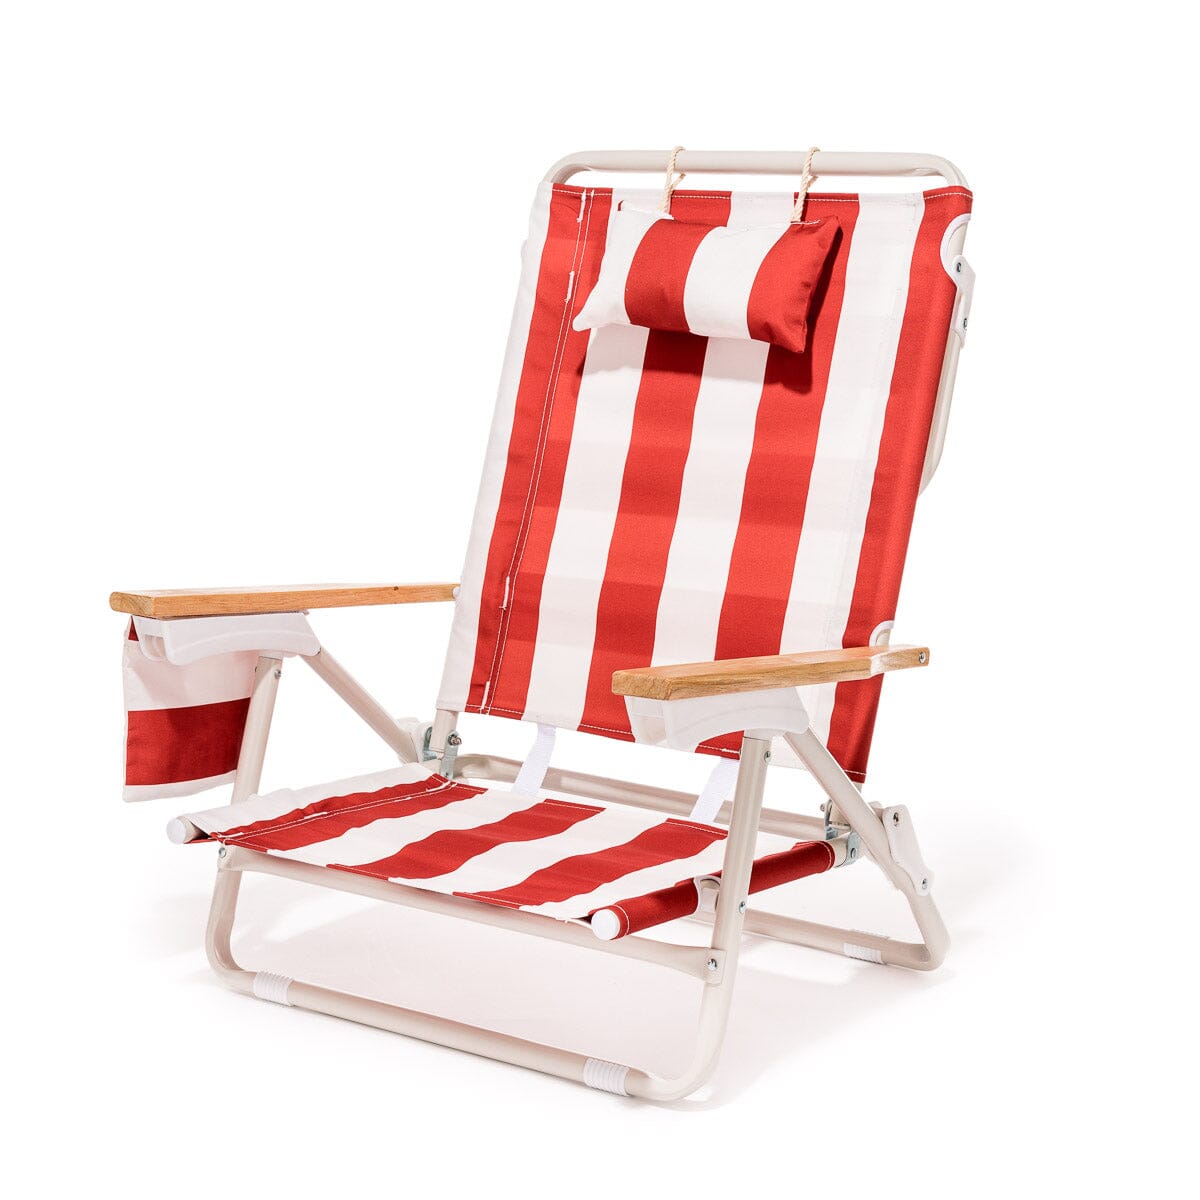 The Holiday Tommy Chair - Le Sirenuse Capri Stripe Holiday Tommy Chair Business & Pleasure Co. 